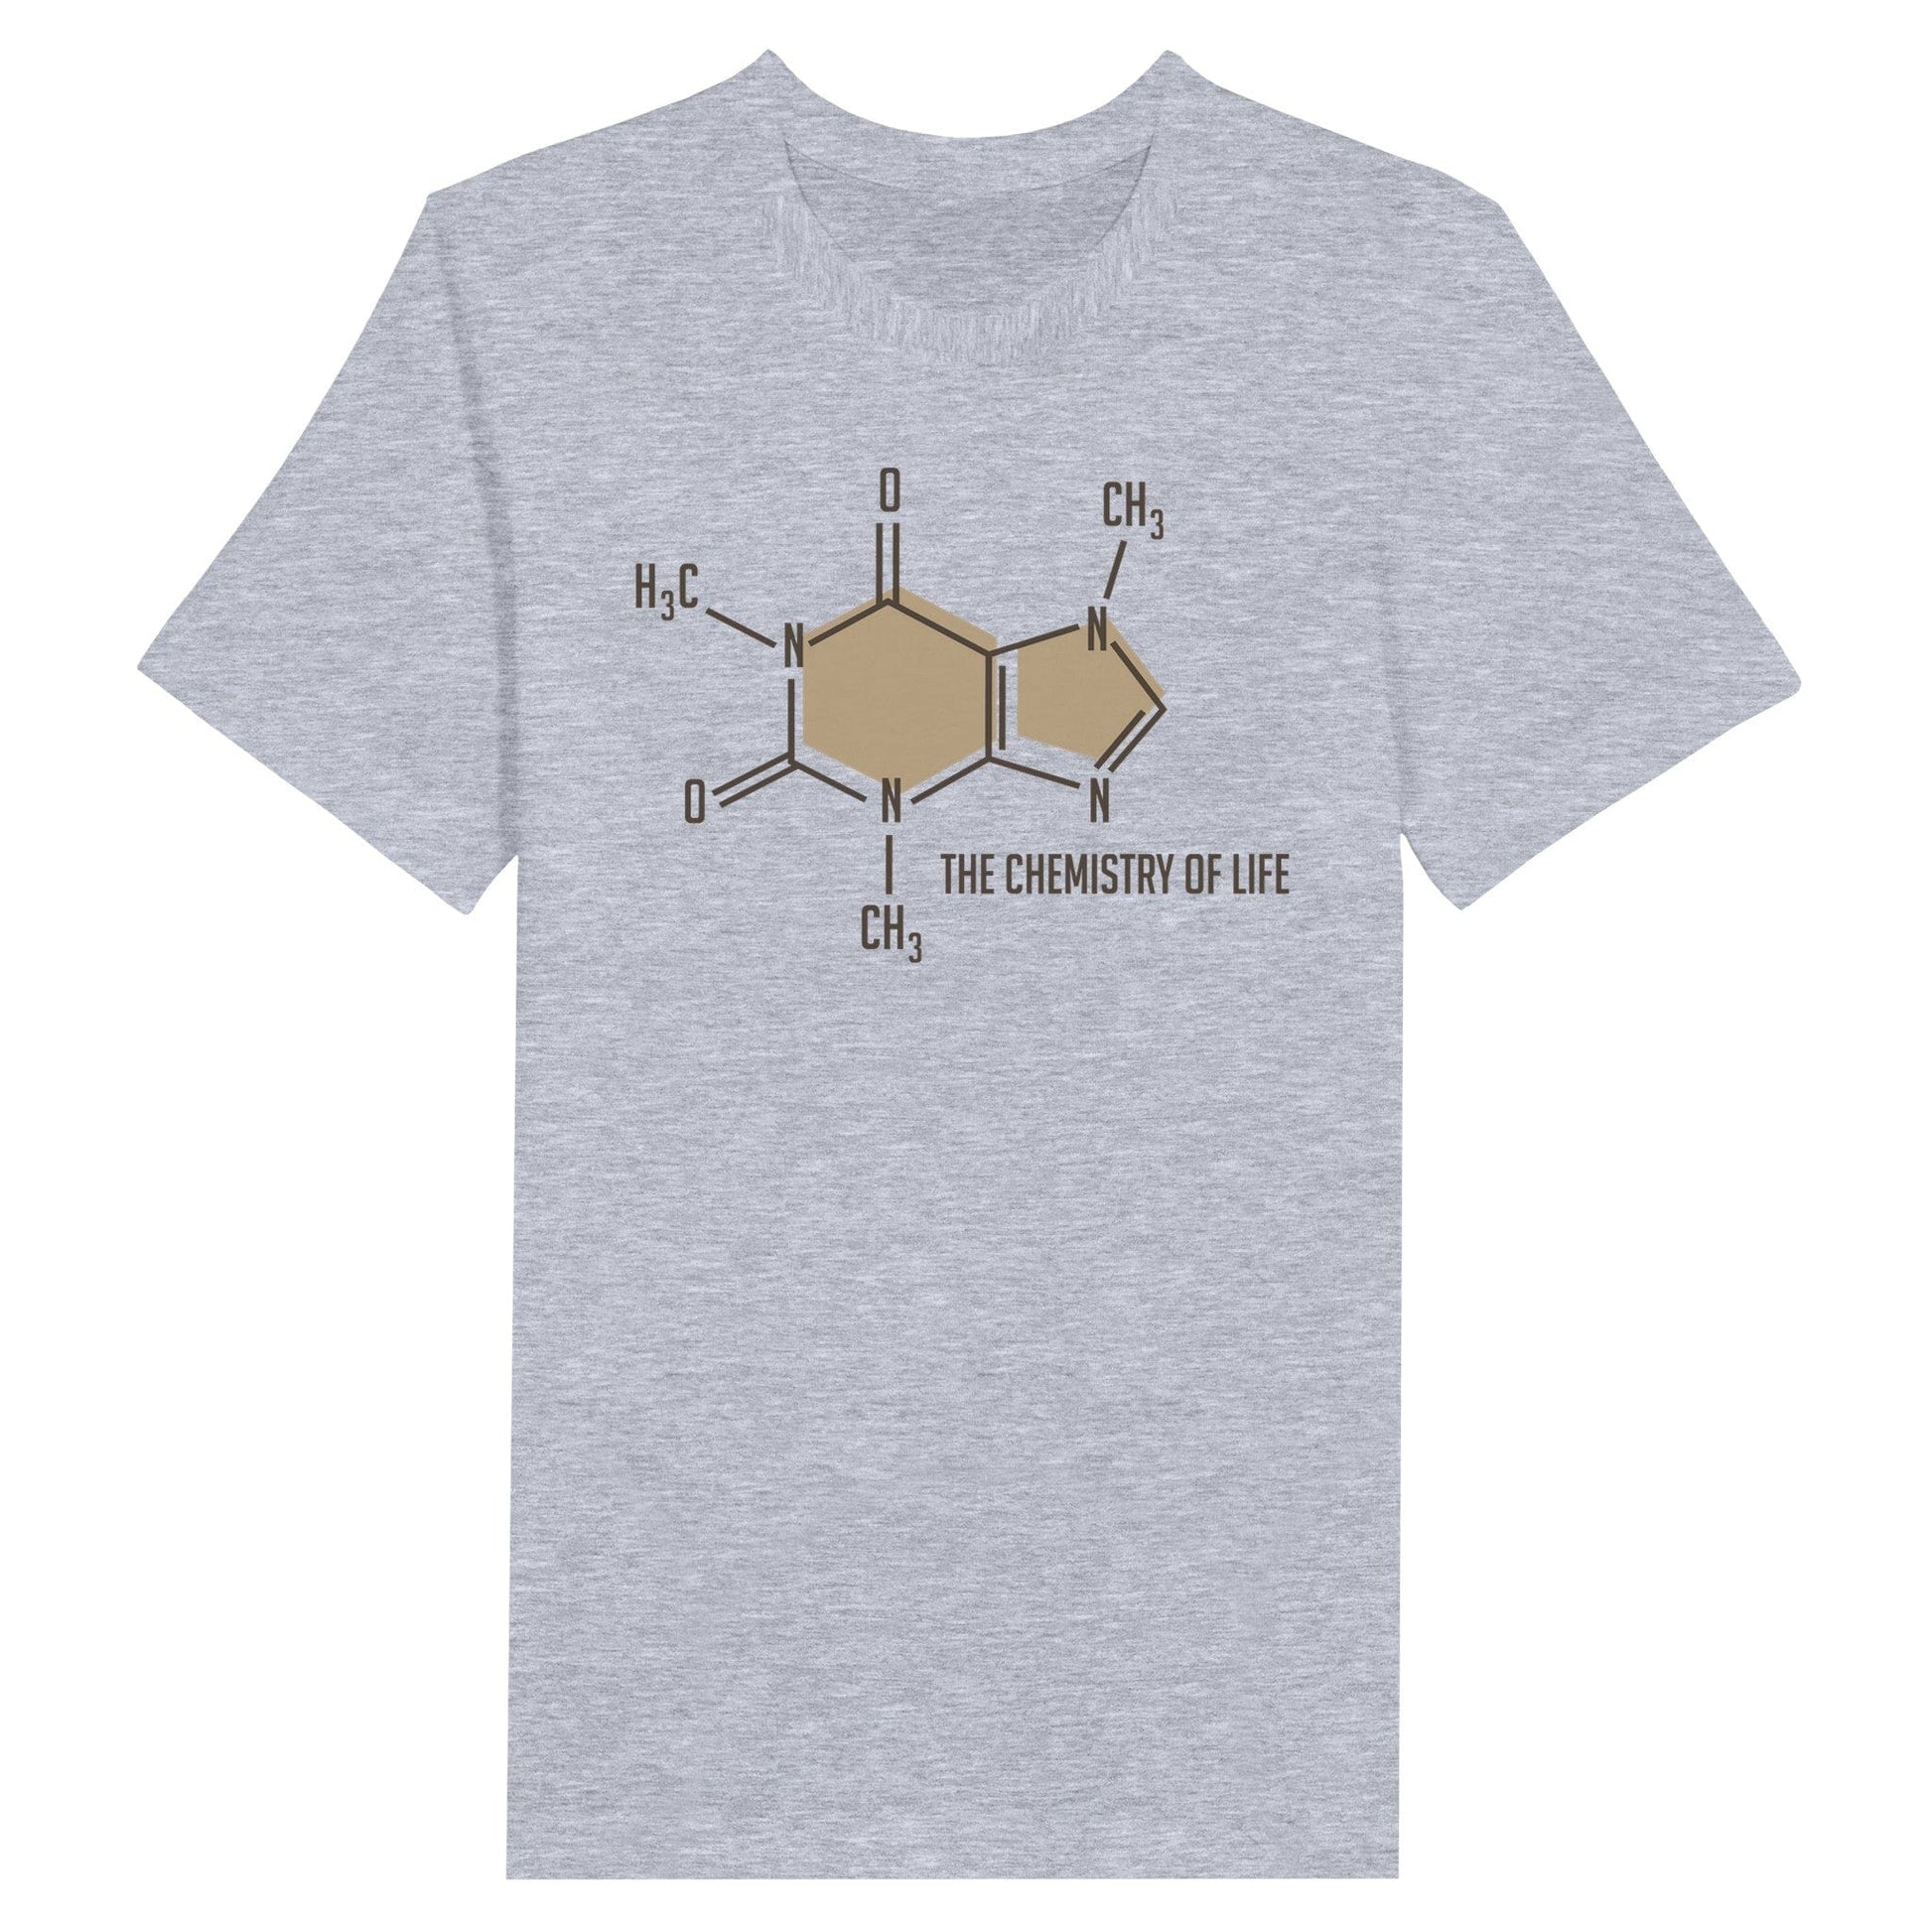 Good Bean Gifts "The Chemistry of Life" Unisex Crewneck T-shirt Ash / S